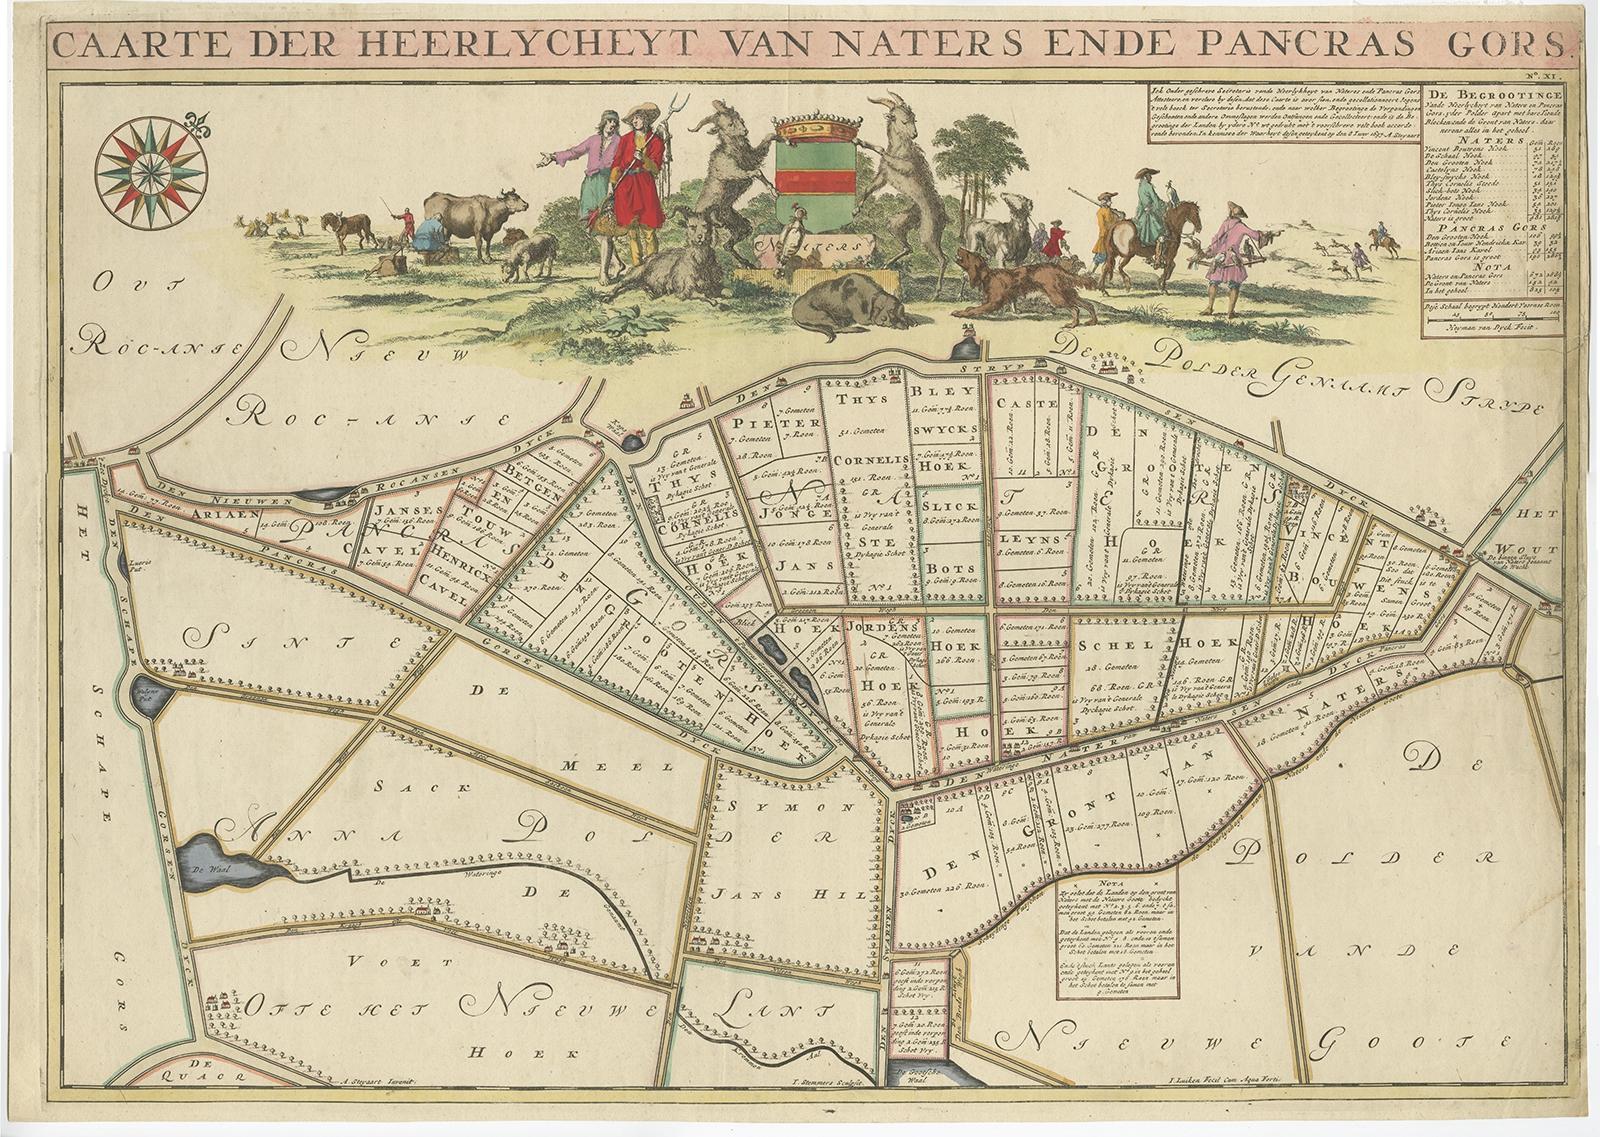 Antique map titled ‘Caarte der Heerlyckheyt van Naters ende Pancras Gors’. 

Beautiful map of the region Naters and Pancrasgors, The Netherlands. This map originates from ‘Caert-boeck Voorne’.

Artists and Engravers: A. Steyvaart, I. Stemmers and I.